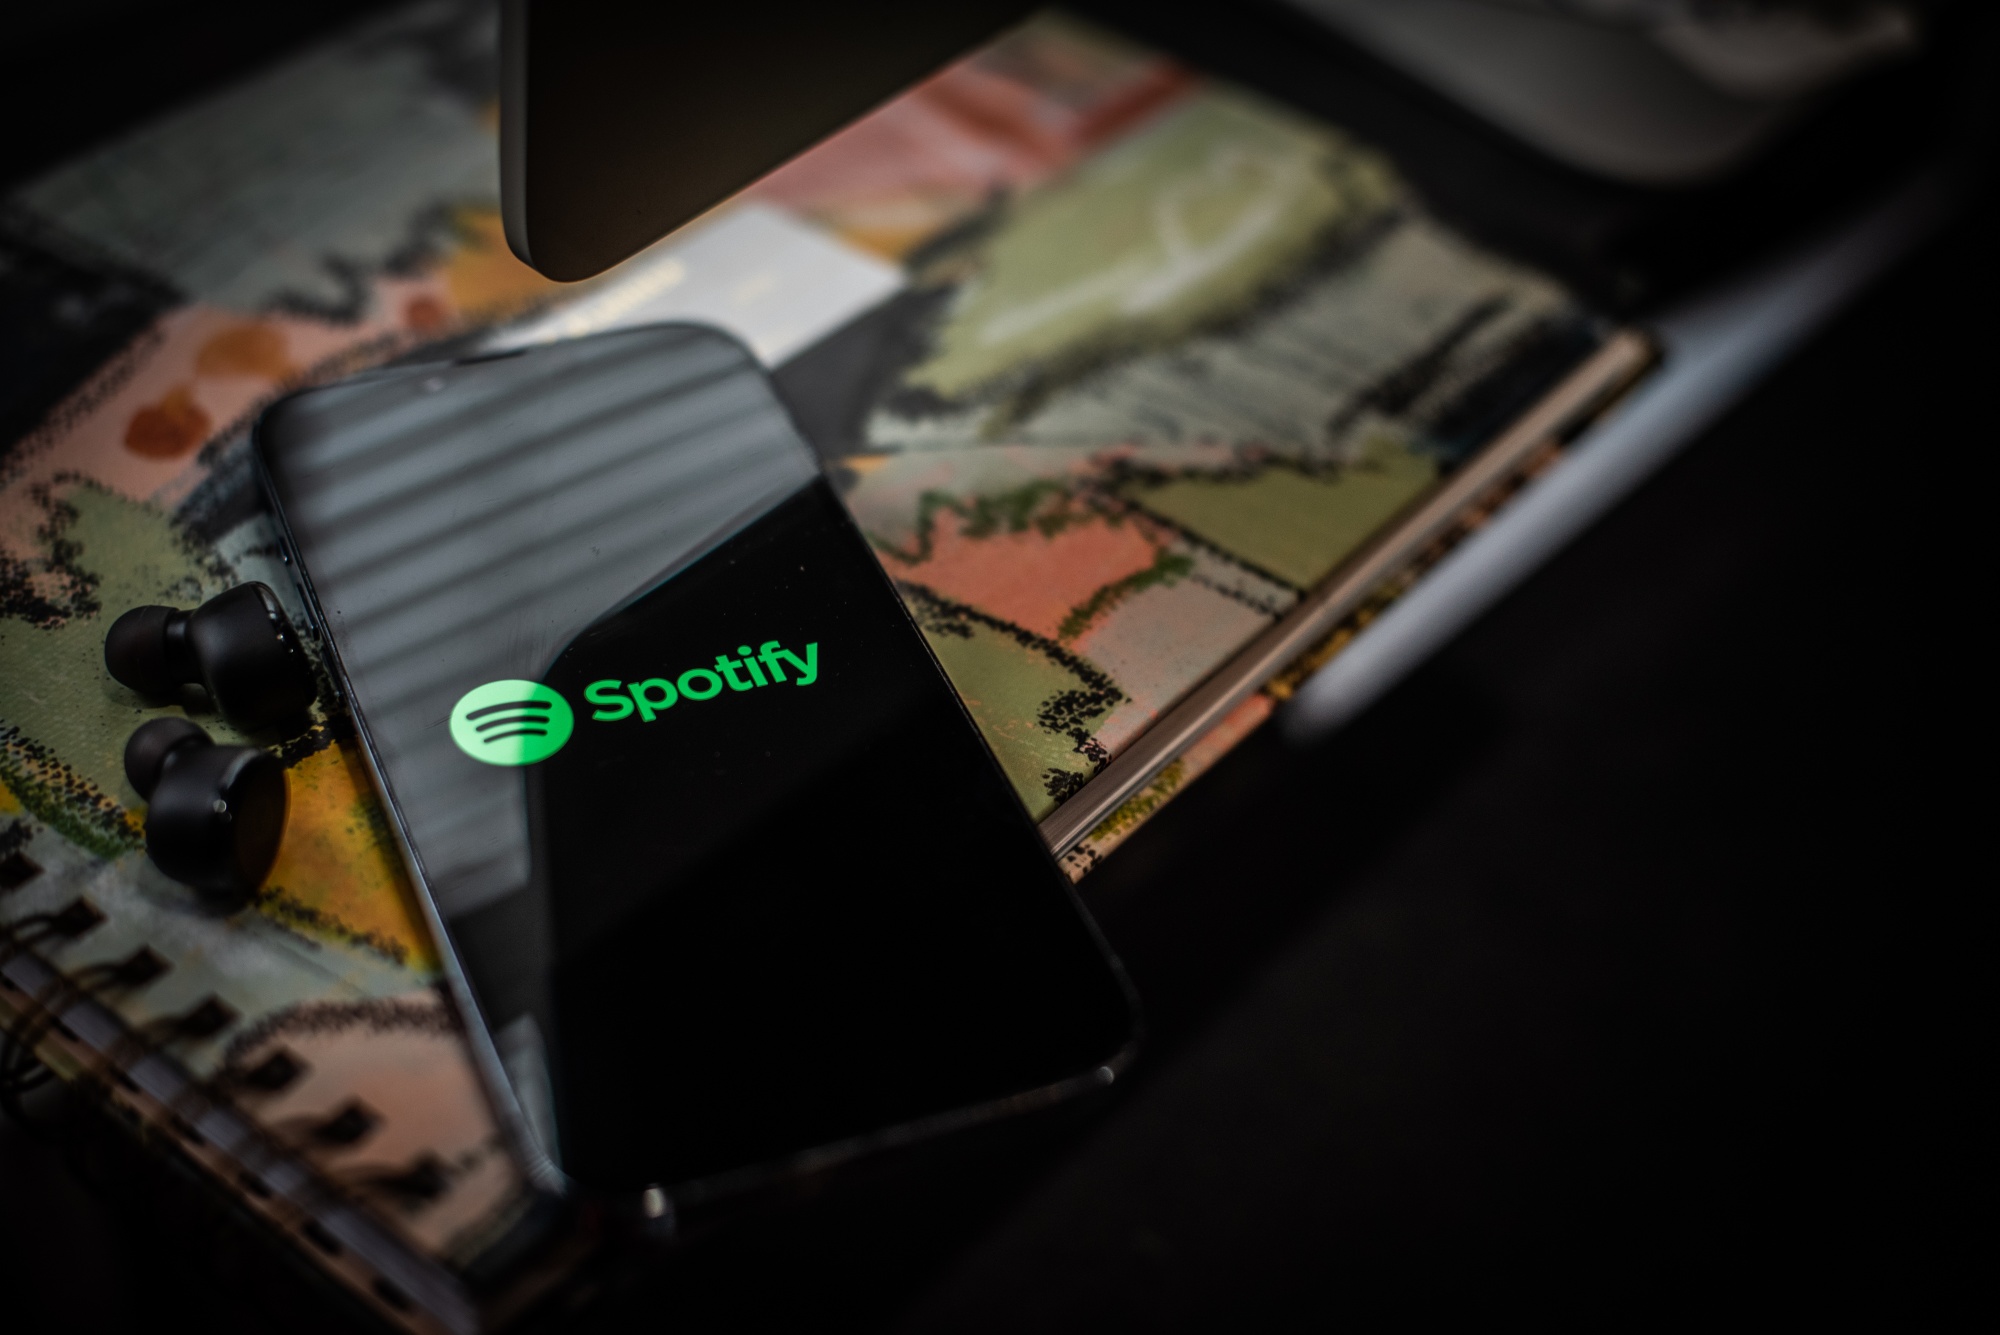 Spotify Has Plans To Move Beyond Music And Become The Instagram